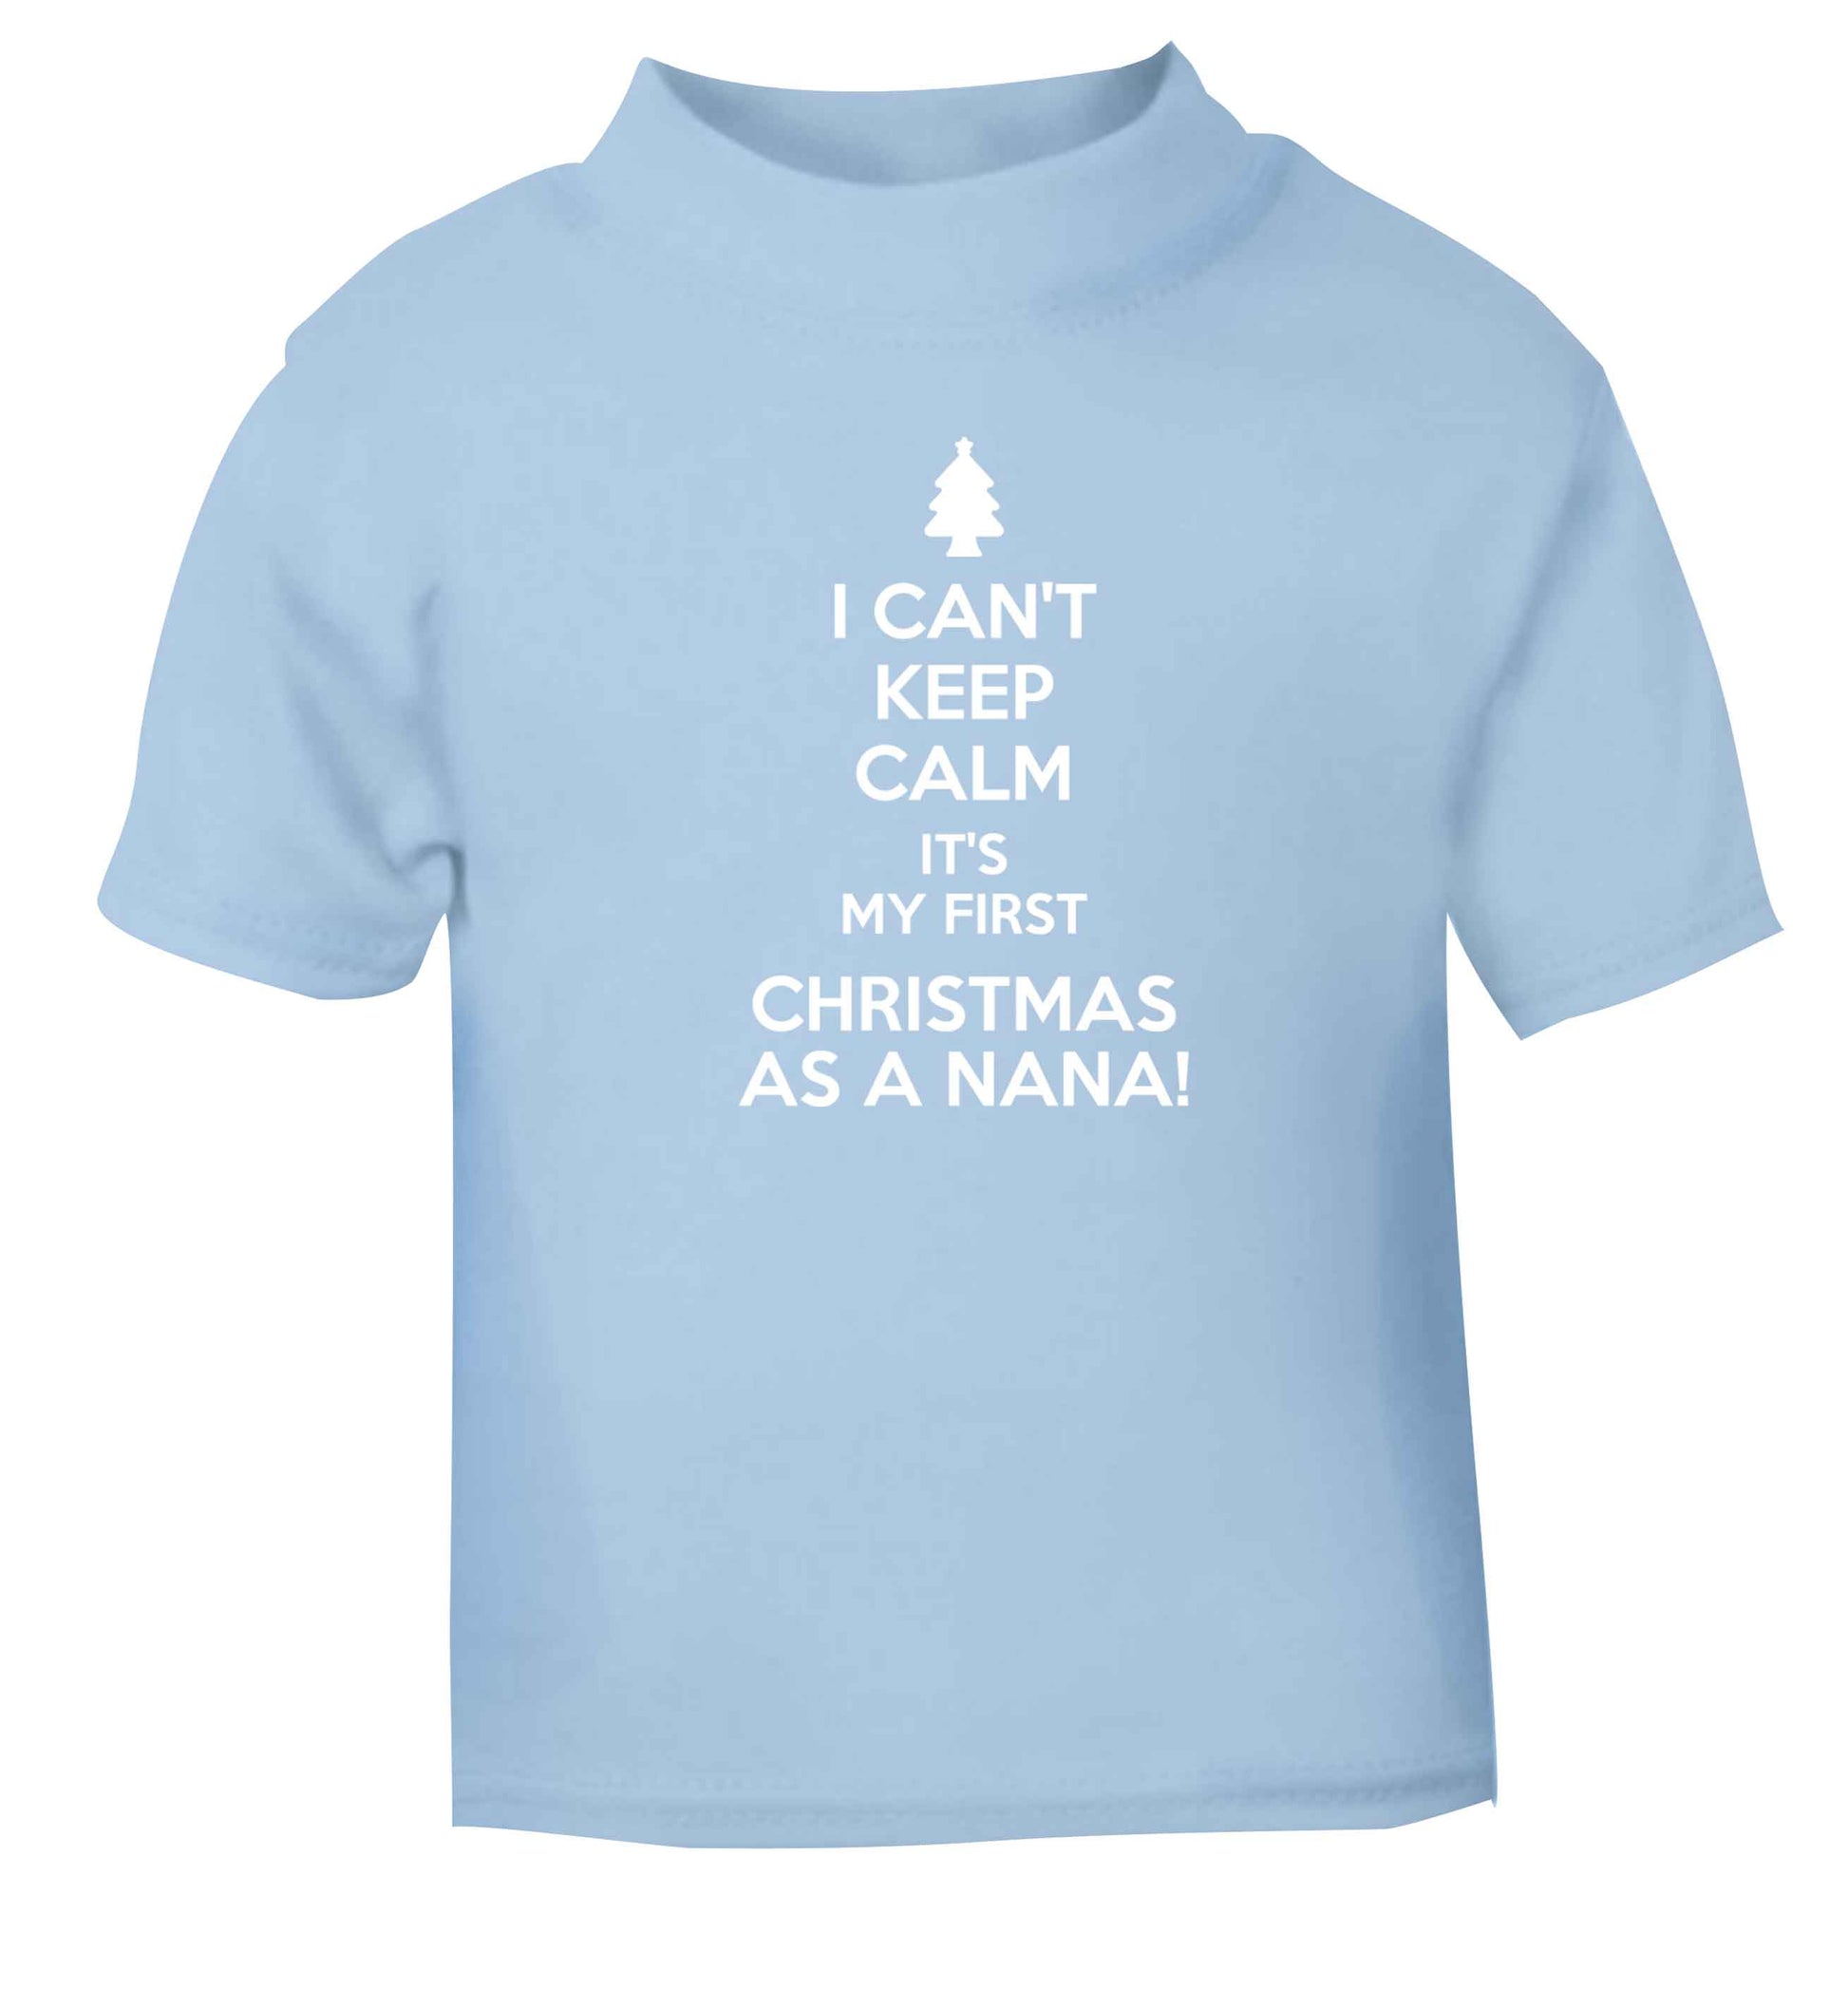 I can't keep calm it's my first Christmas as a nana! light blue Baby Toddler Tshirt 2 Years